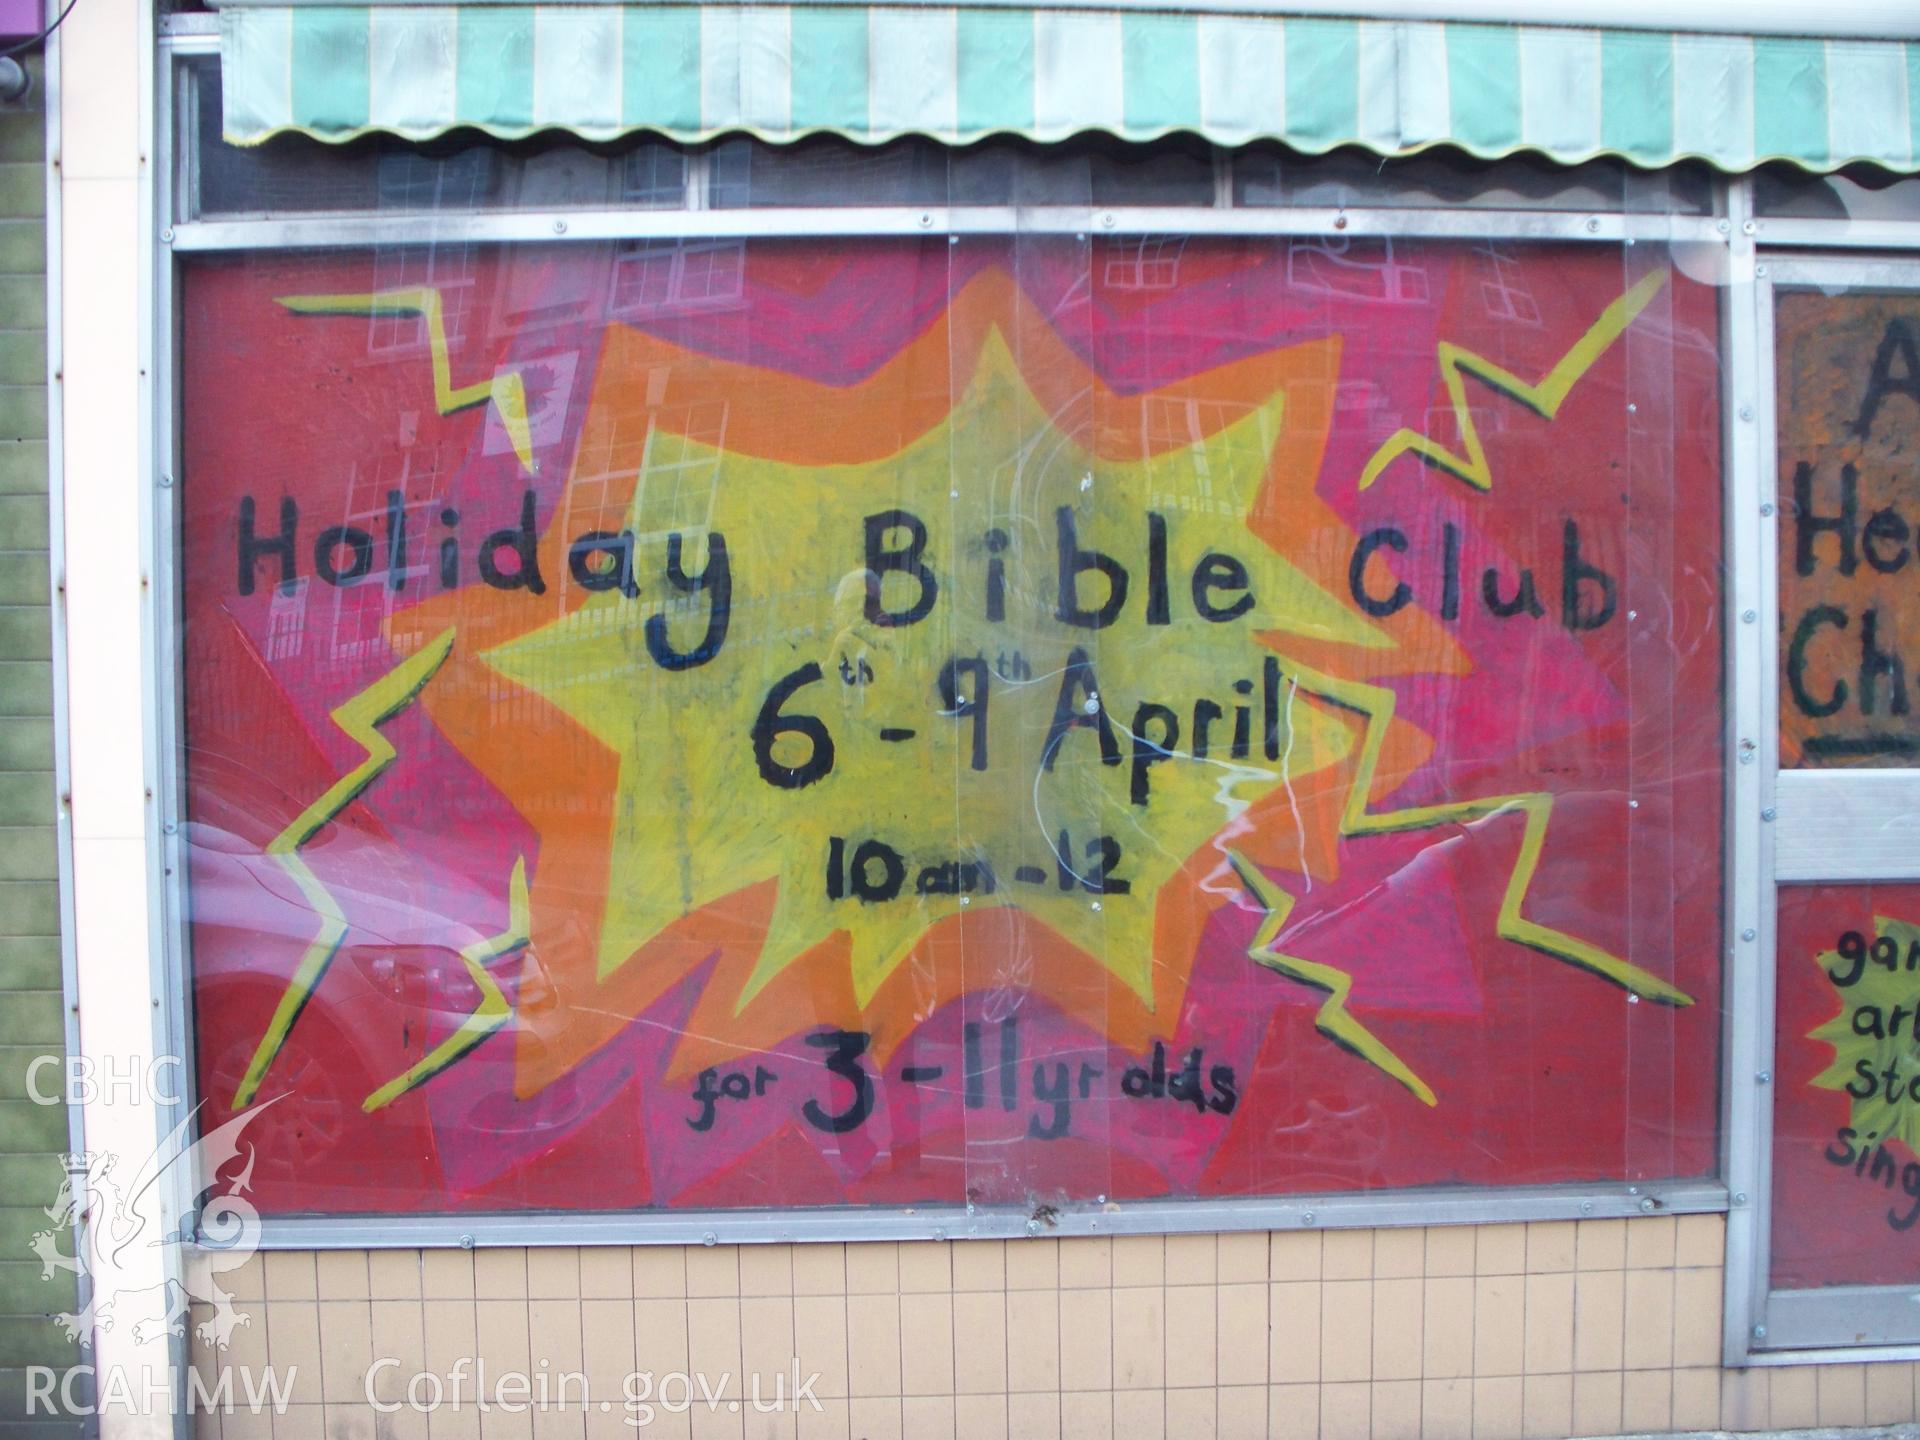 Vacant shop window on left-hand side advertising Bible Club.